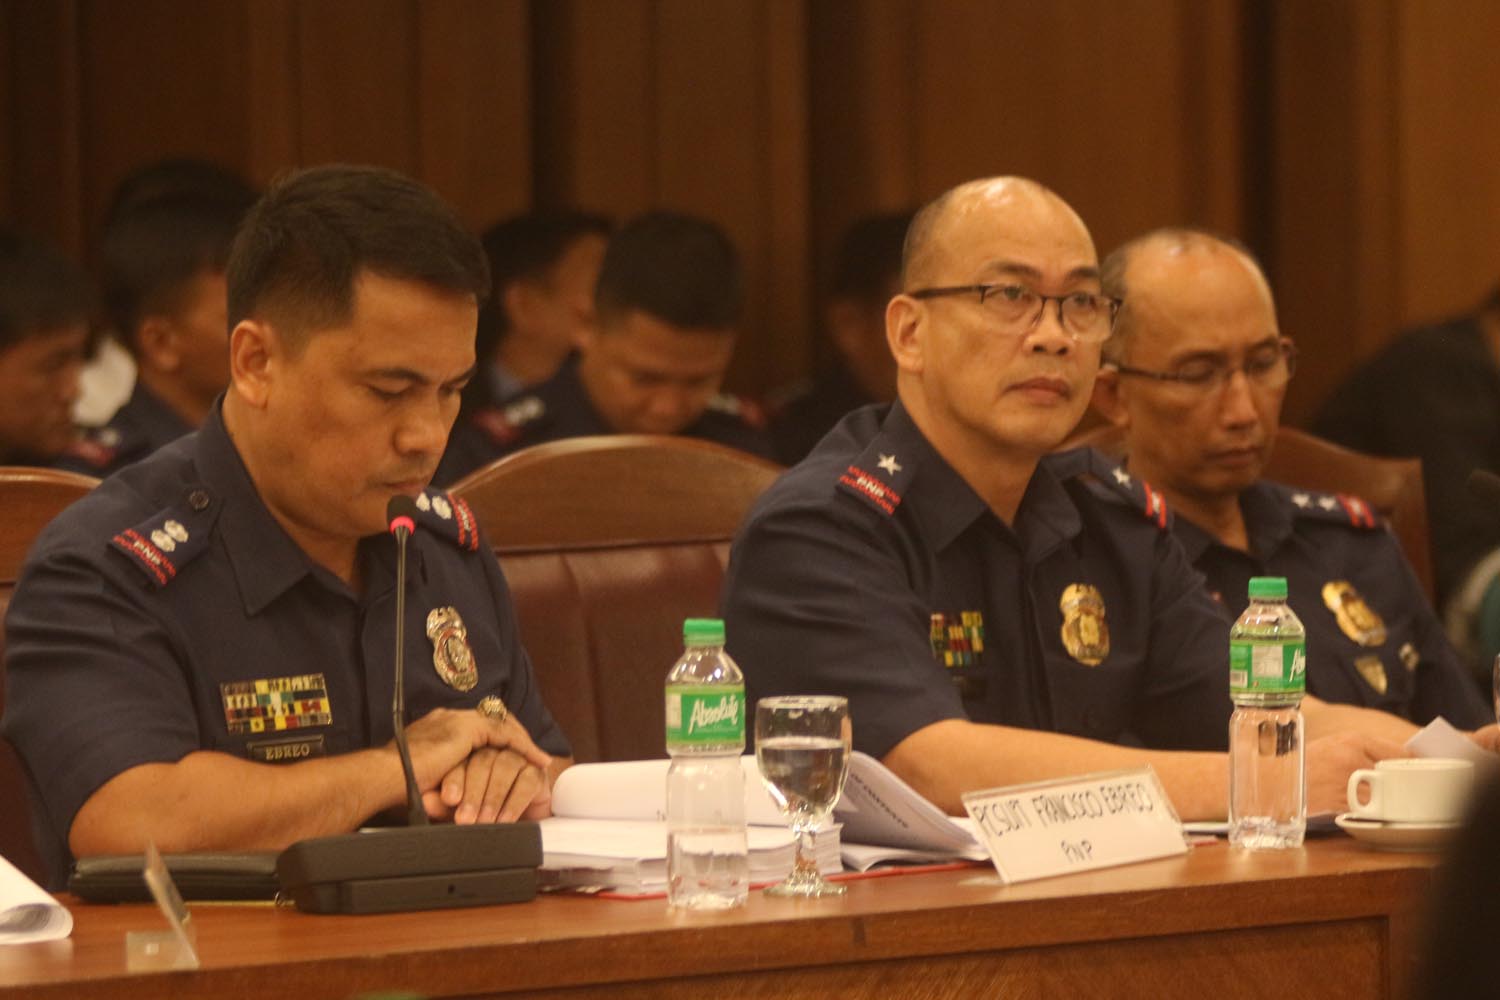 HOUSE PROBE. (Left to right) Police Superintendents Francisco Ebreo and Eliseo Rasco, and Police Superintendent Benjamin Magalong attend a House inquiry on November 16, 2016. Photo by Joel Liporada/Rappler  